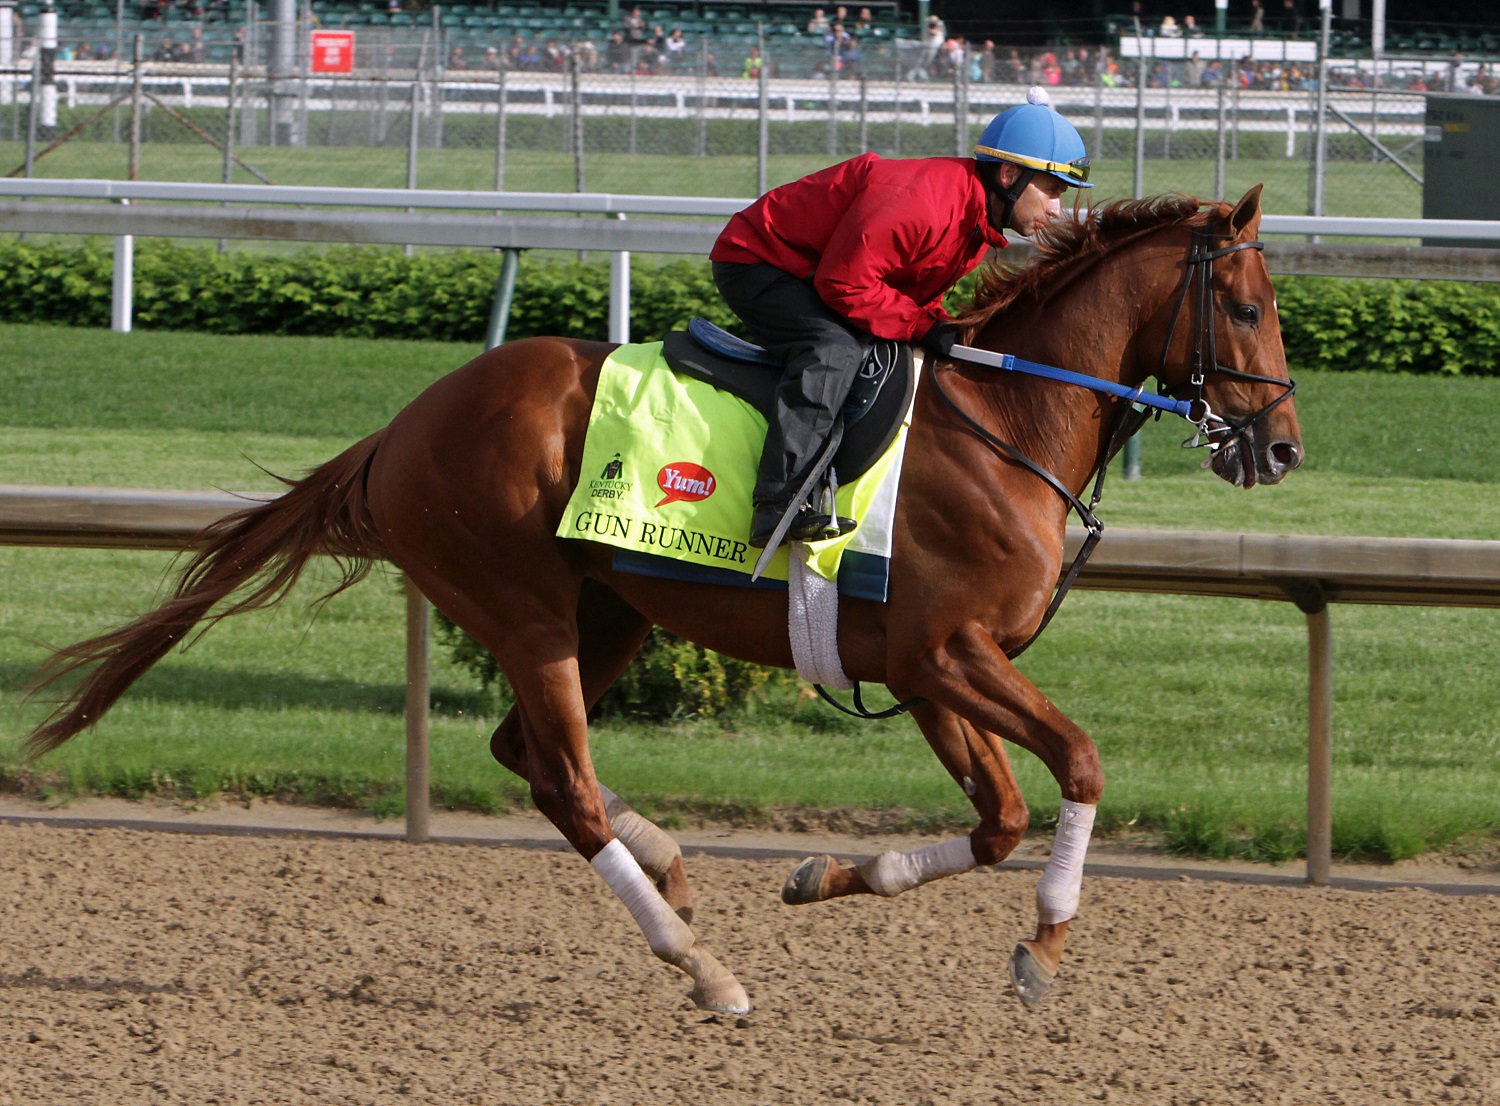 Kentucky Derby entrant Gun Runner, ridden by exercise rider Carlos Rosas, works out at Churchill Downs in Louisville, Ky., Thursday, May 5, 2016. The 142nd Kentucky Derby is Saturday, May 7. (AP Photo/Garry Jones)